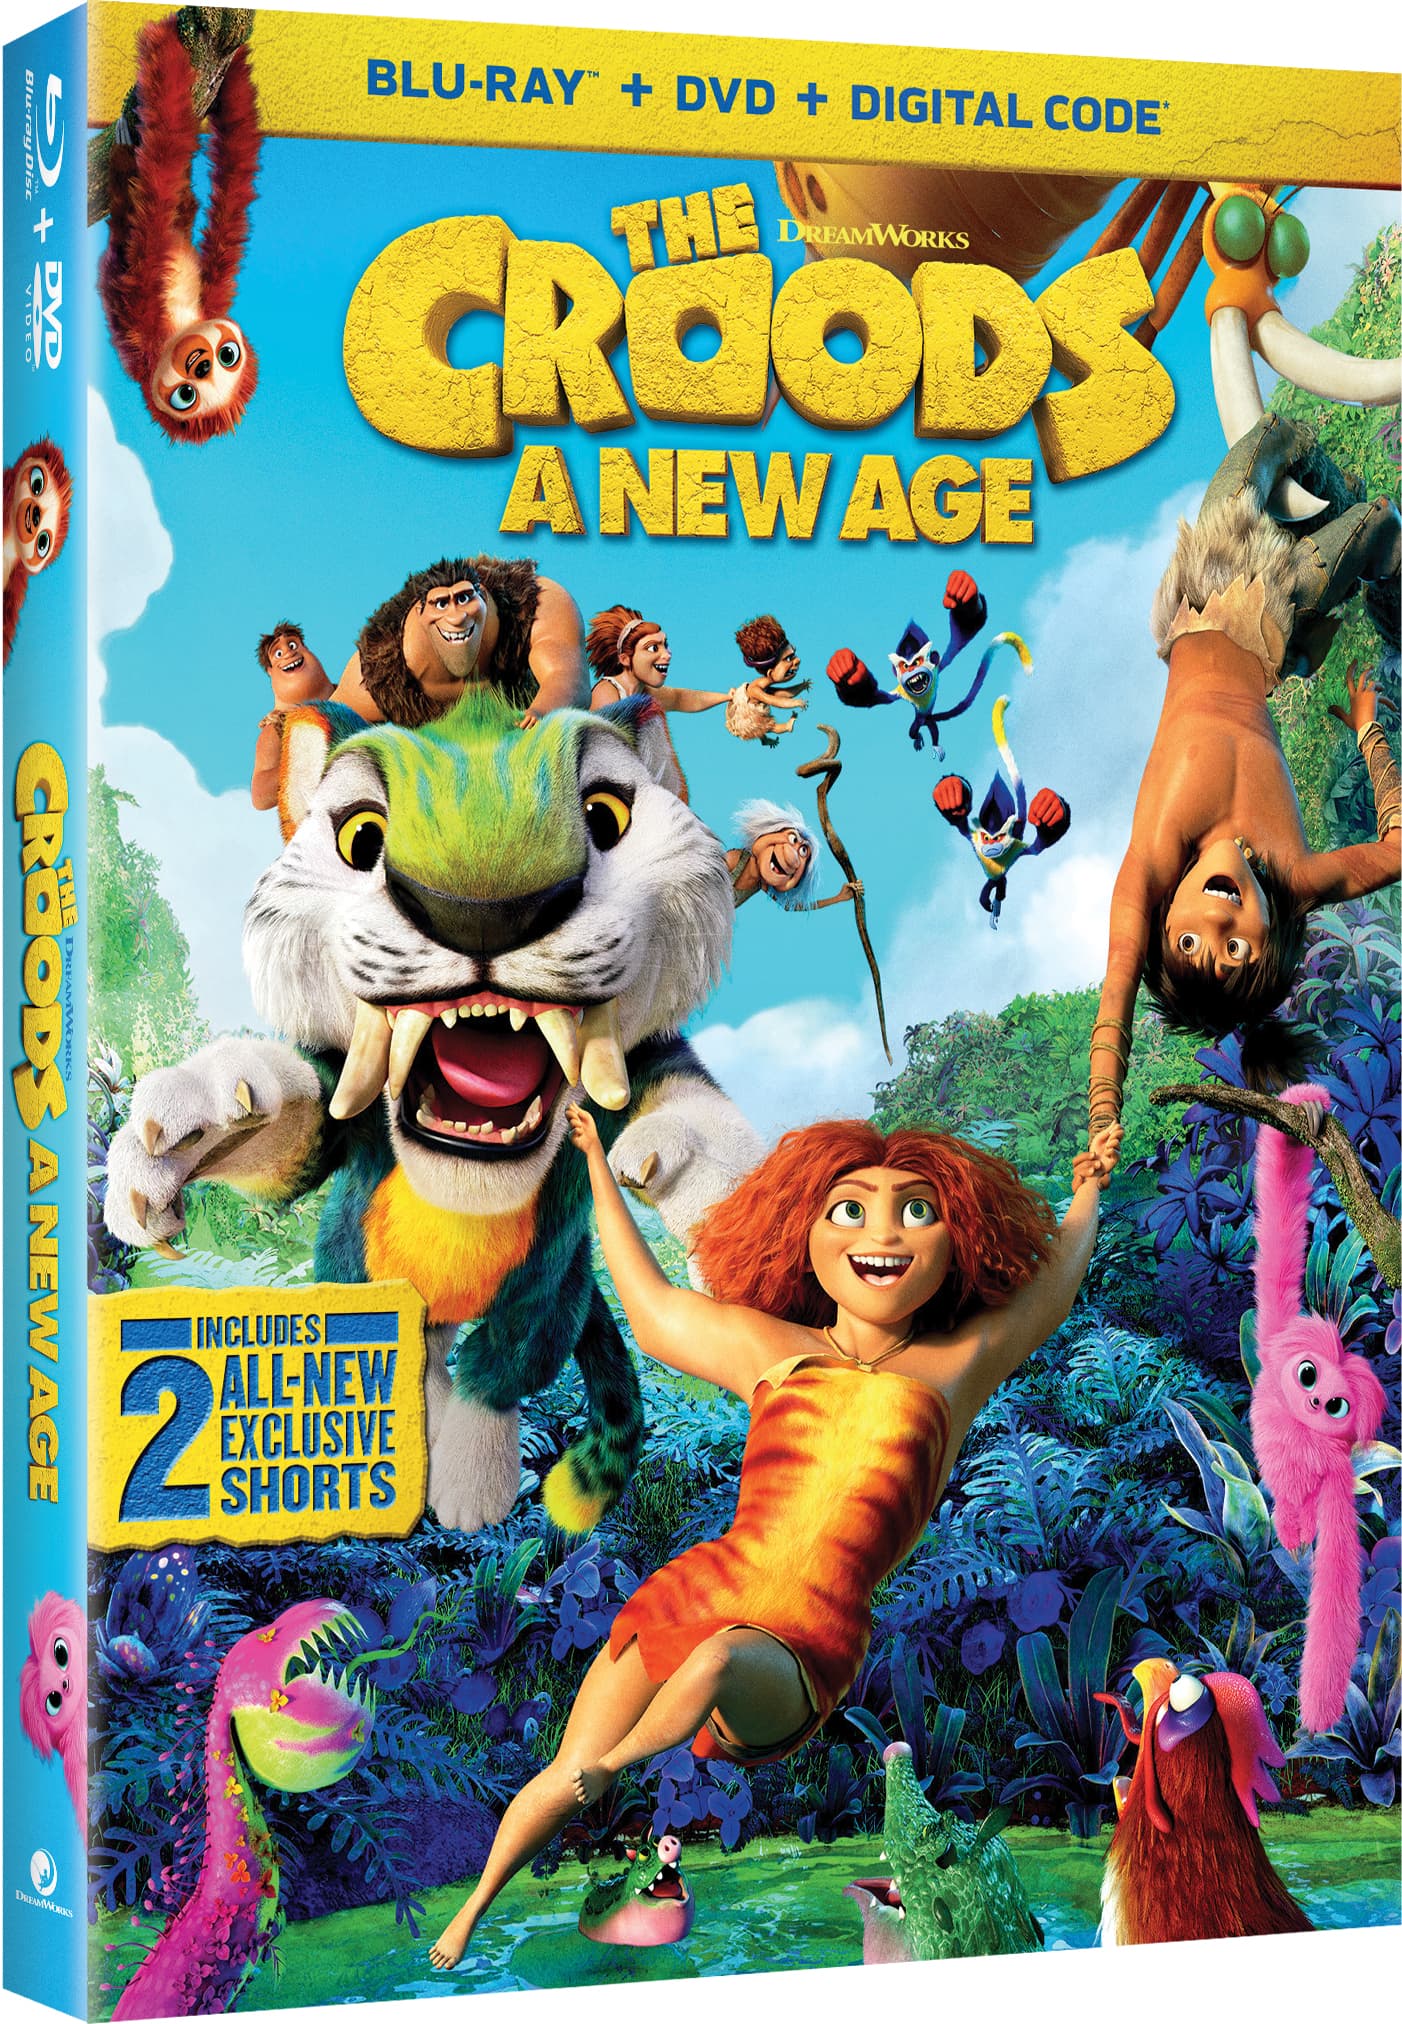 The Croods: A New Age Blu-ray Release Info